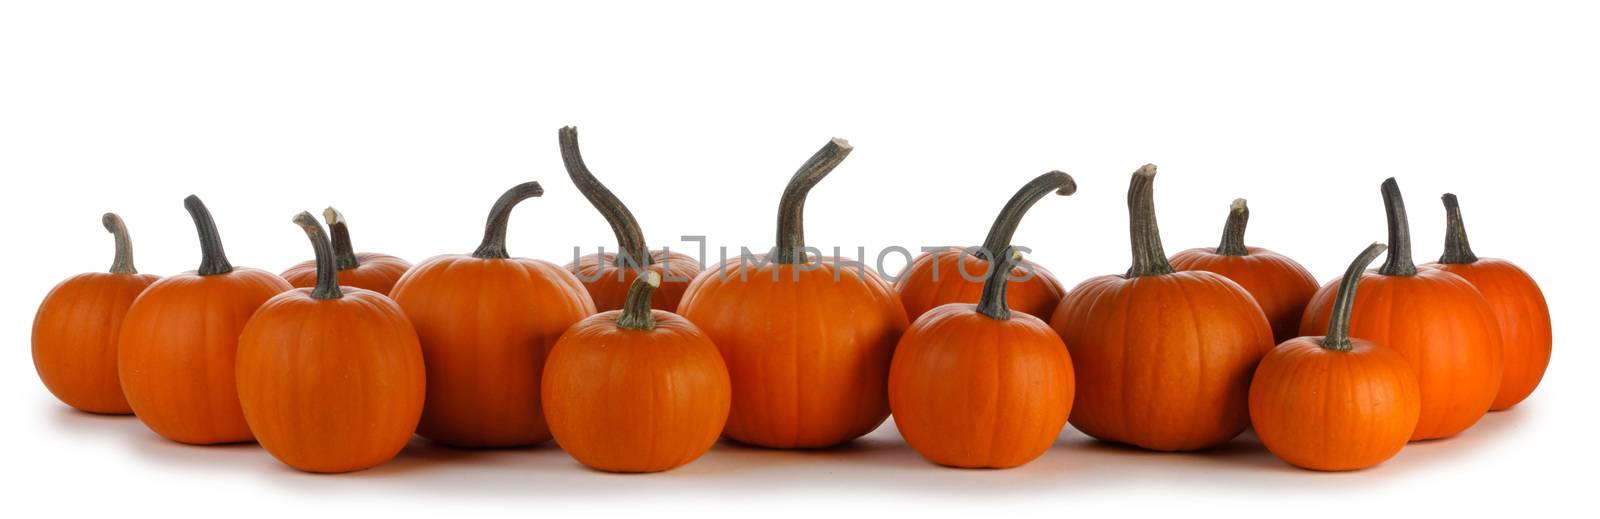 Pumpkins in a row on white background by Yellowj